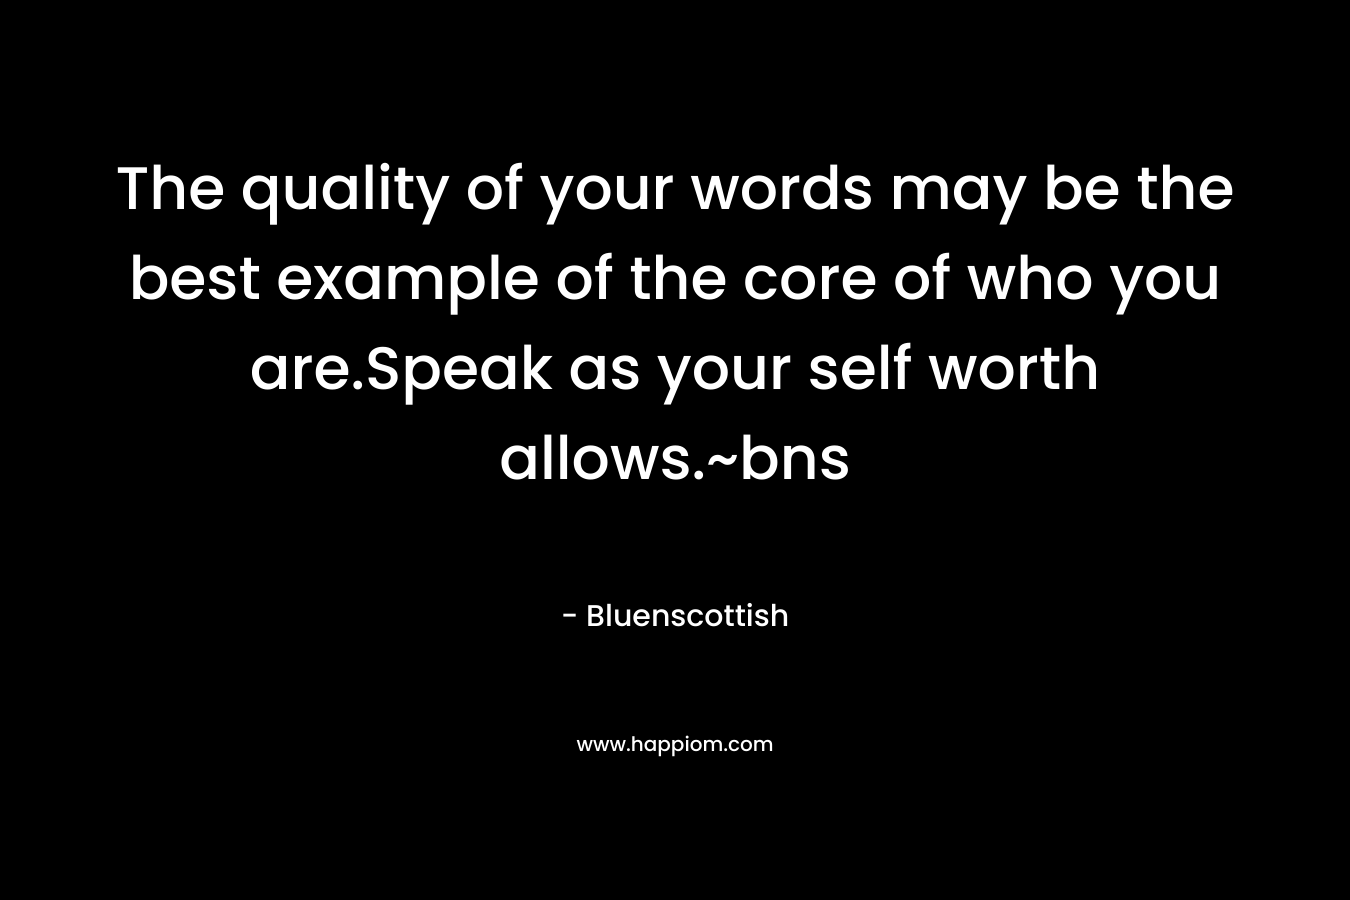 The quality of your words may be the best example of the core of who you are.Speak as your self worth allows.~bns